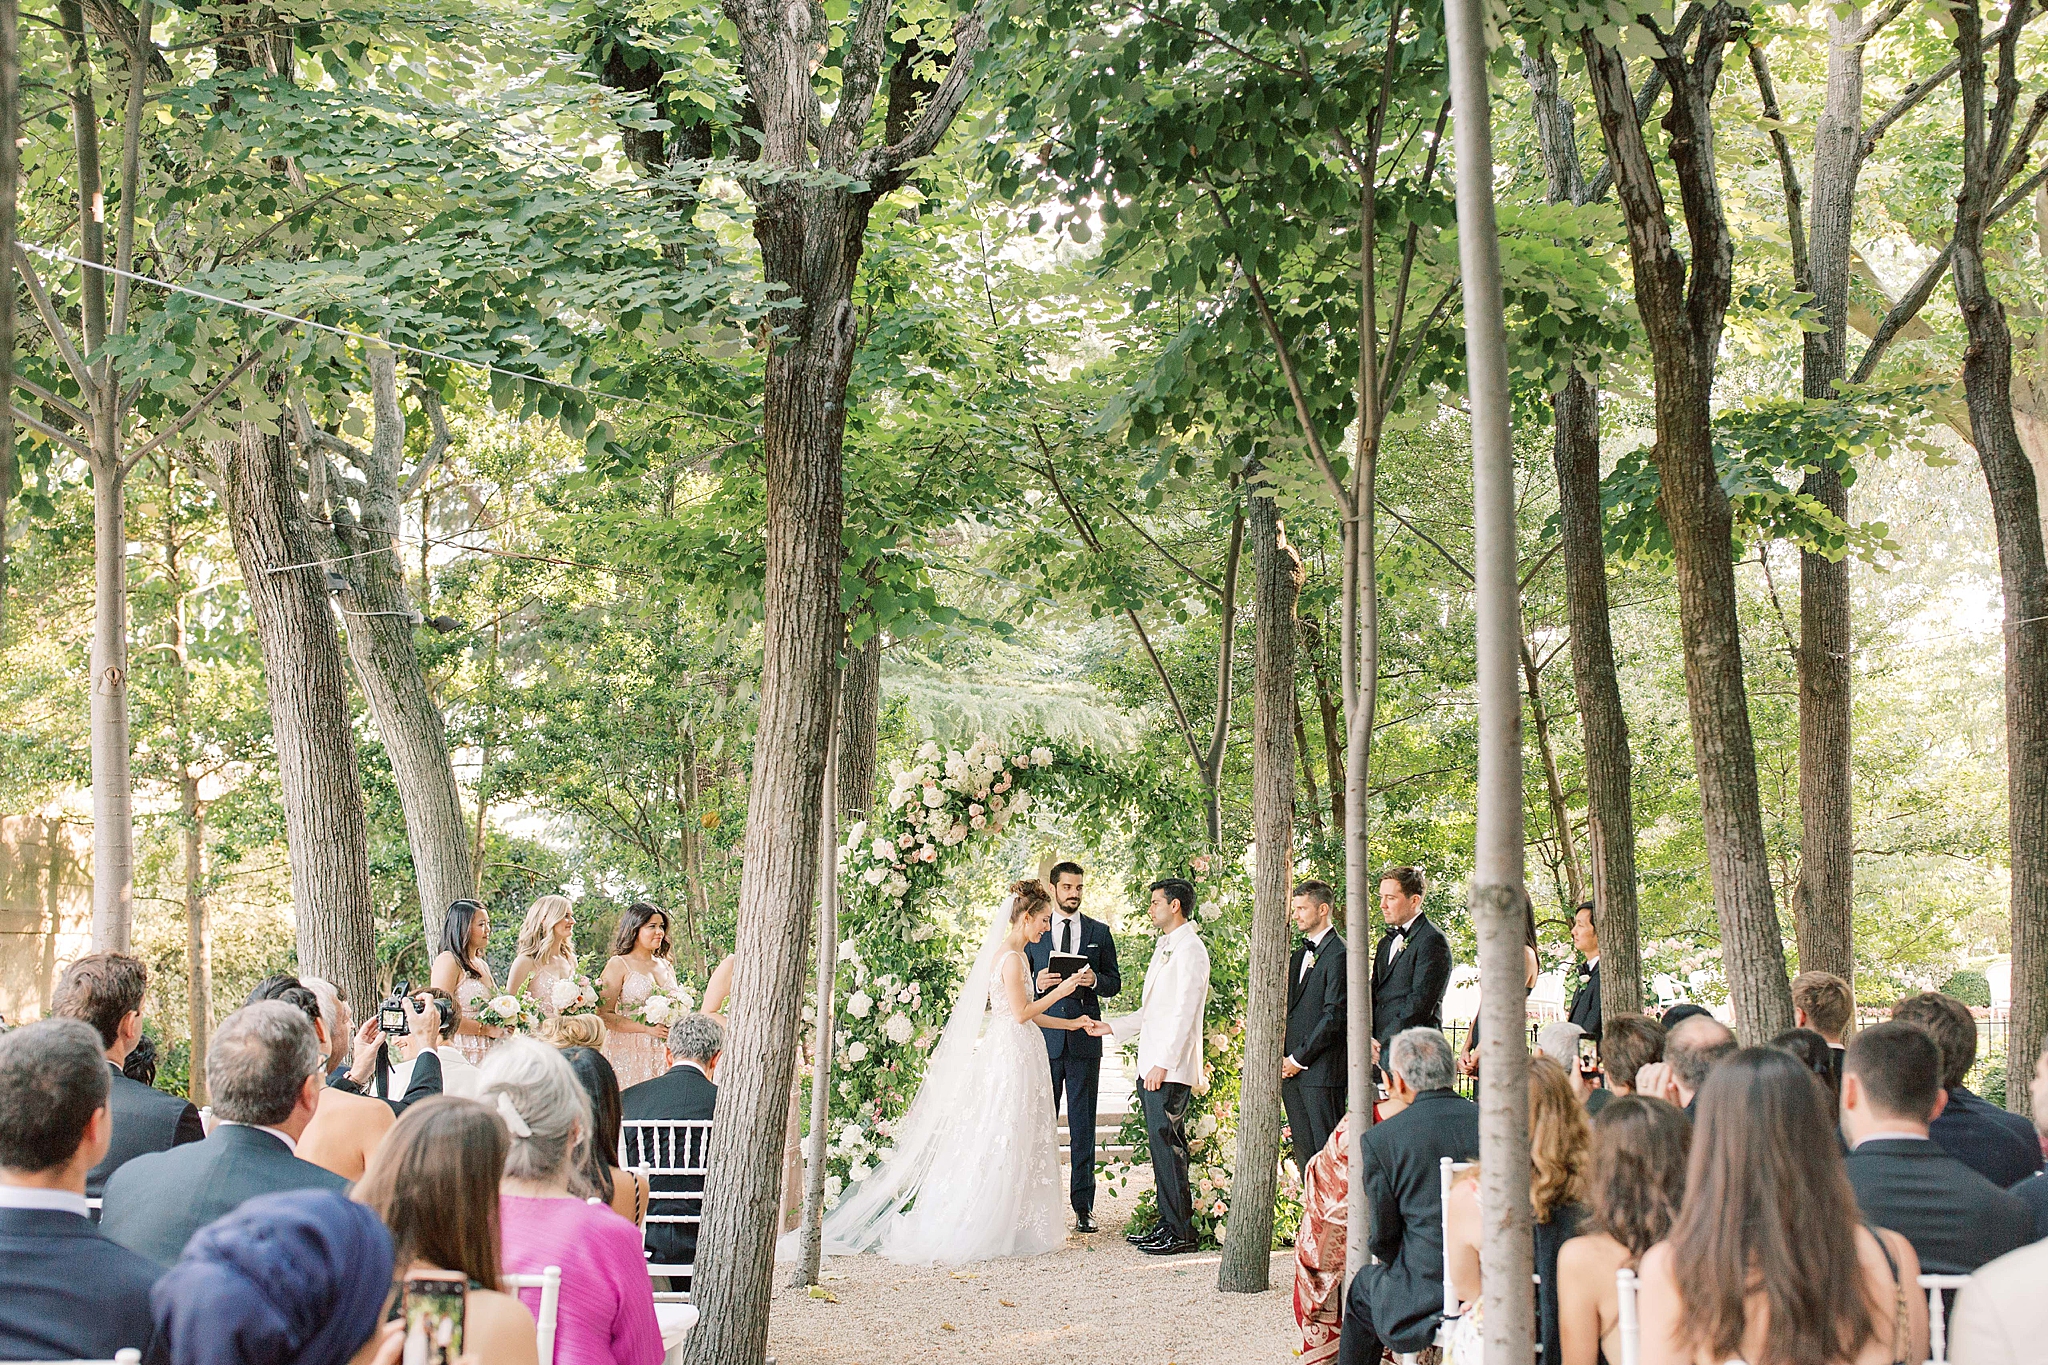 Wedding ceremony in the Linden Grove at the Meridian House in Washington, DC.